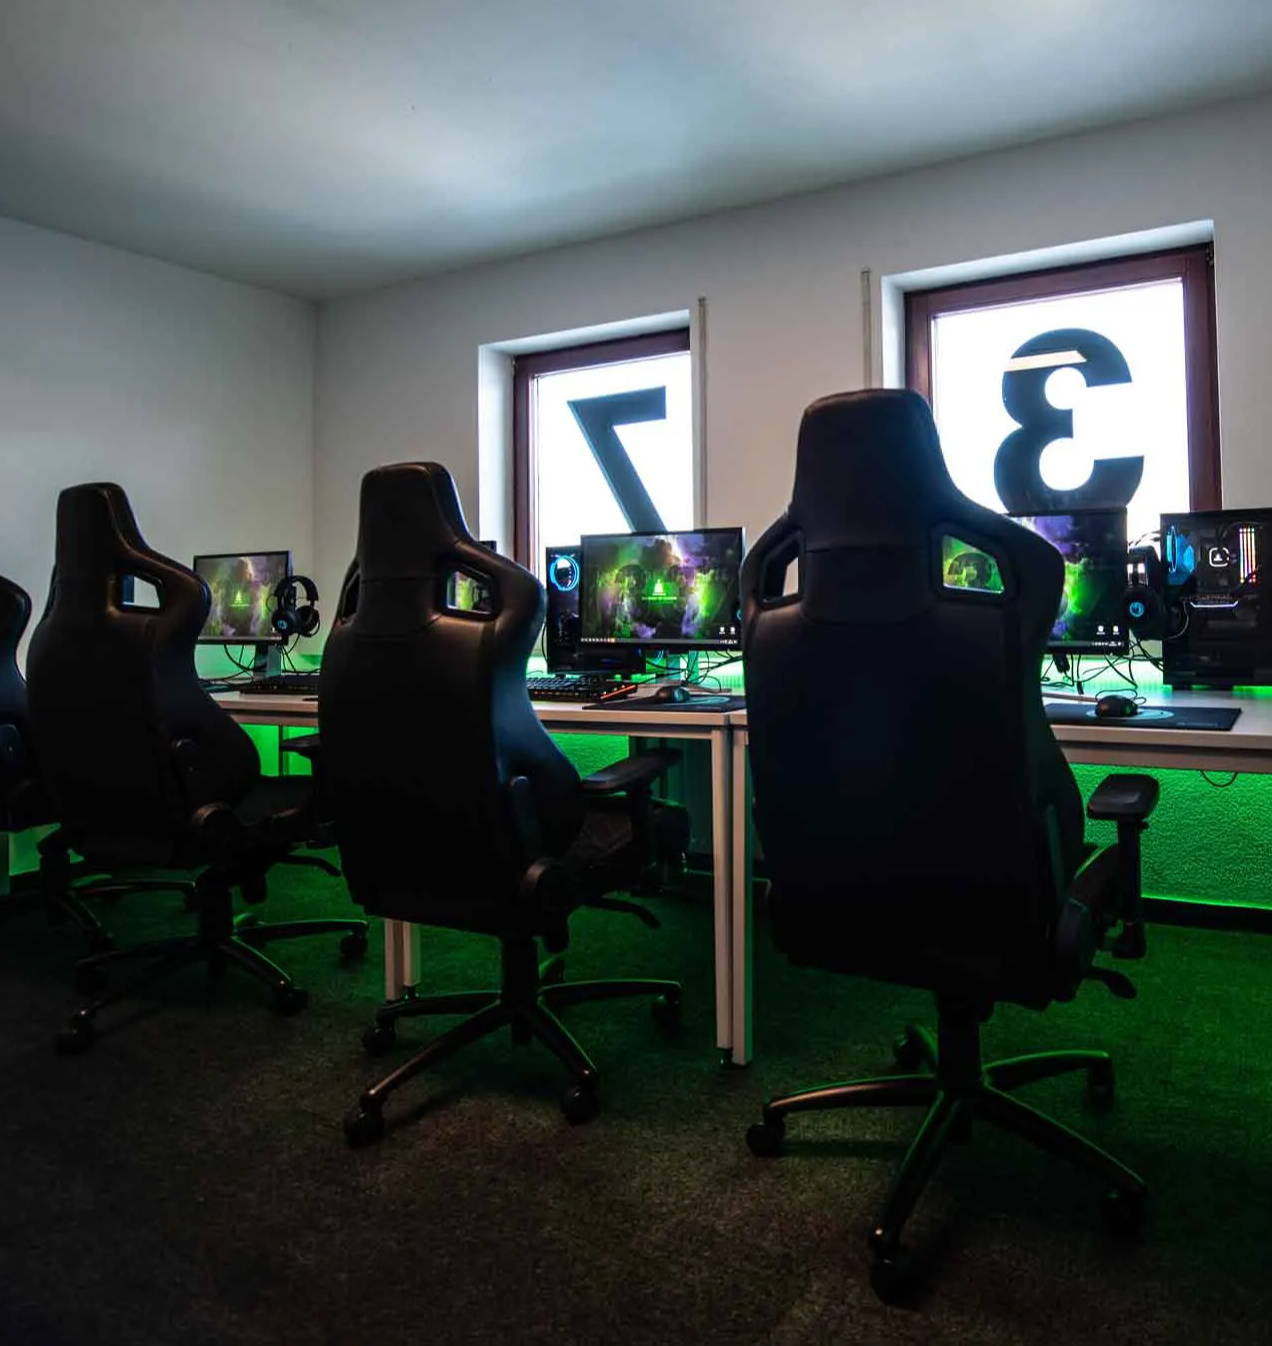 The Best Chairs for Gaming